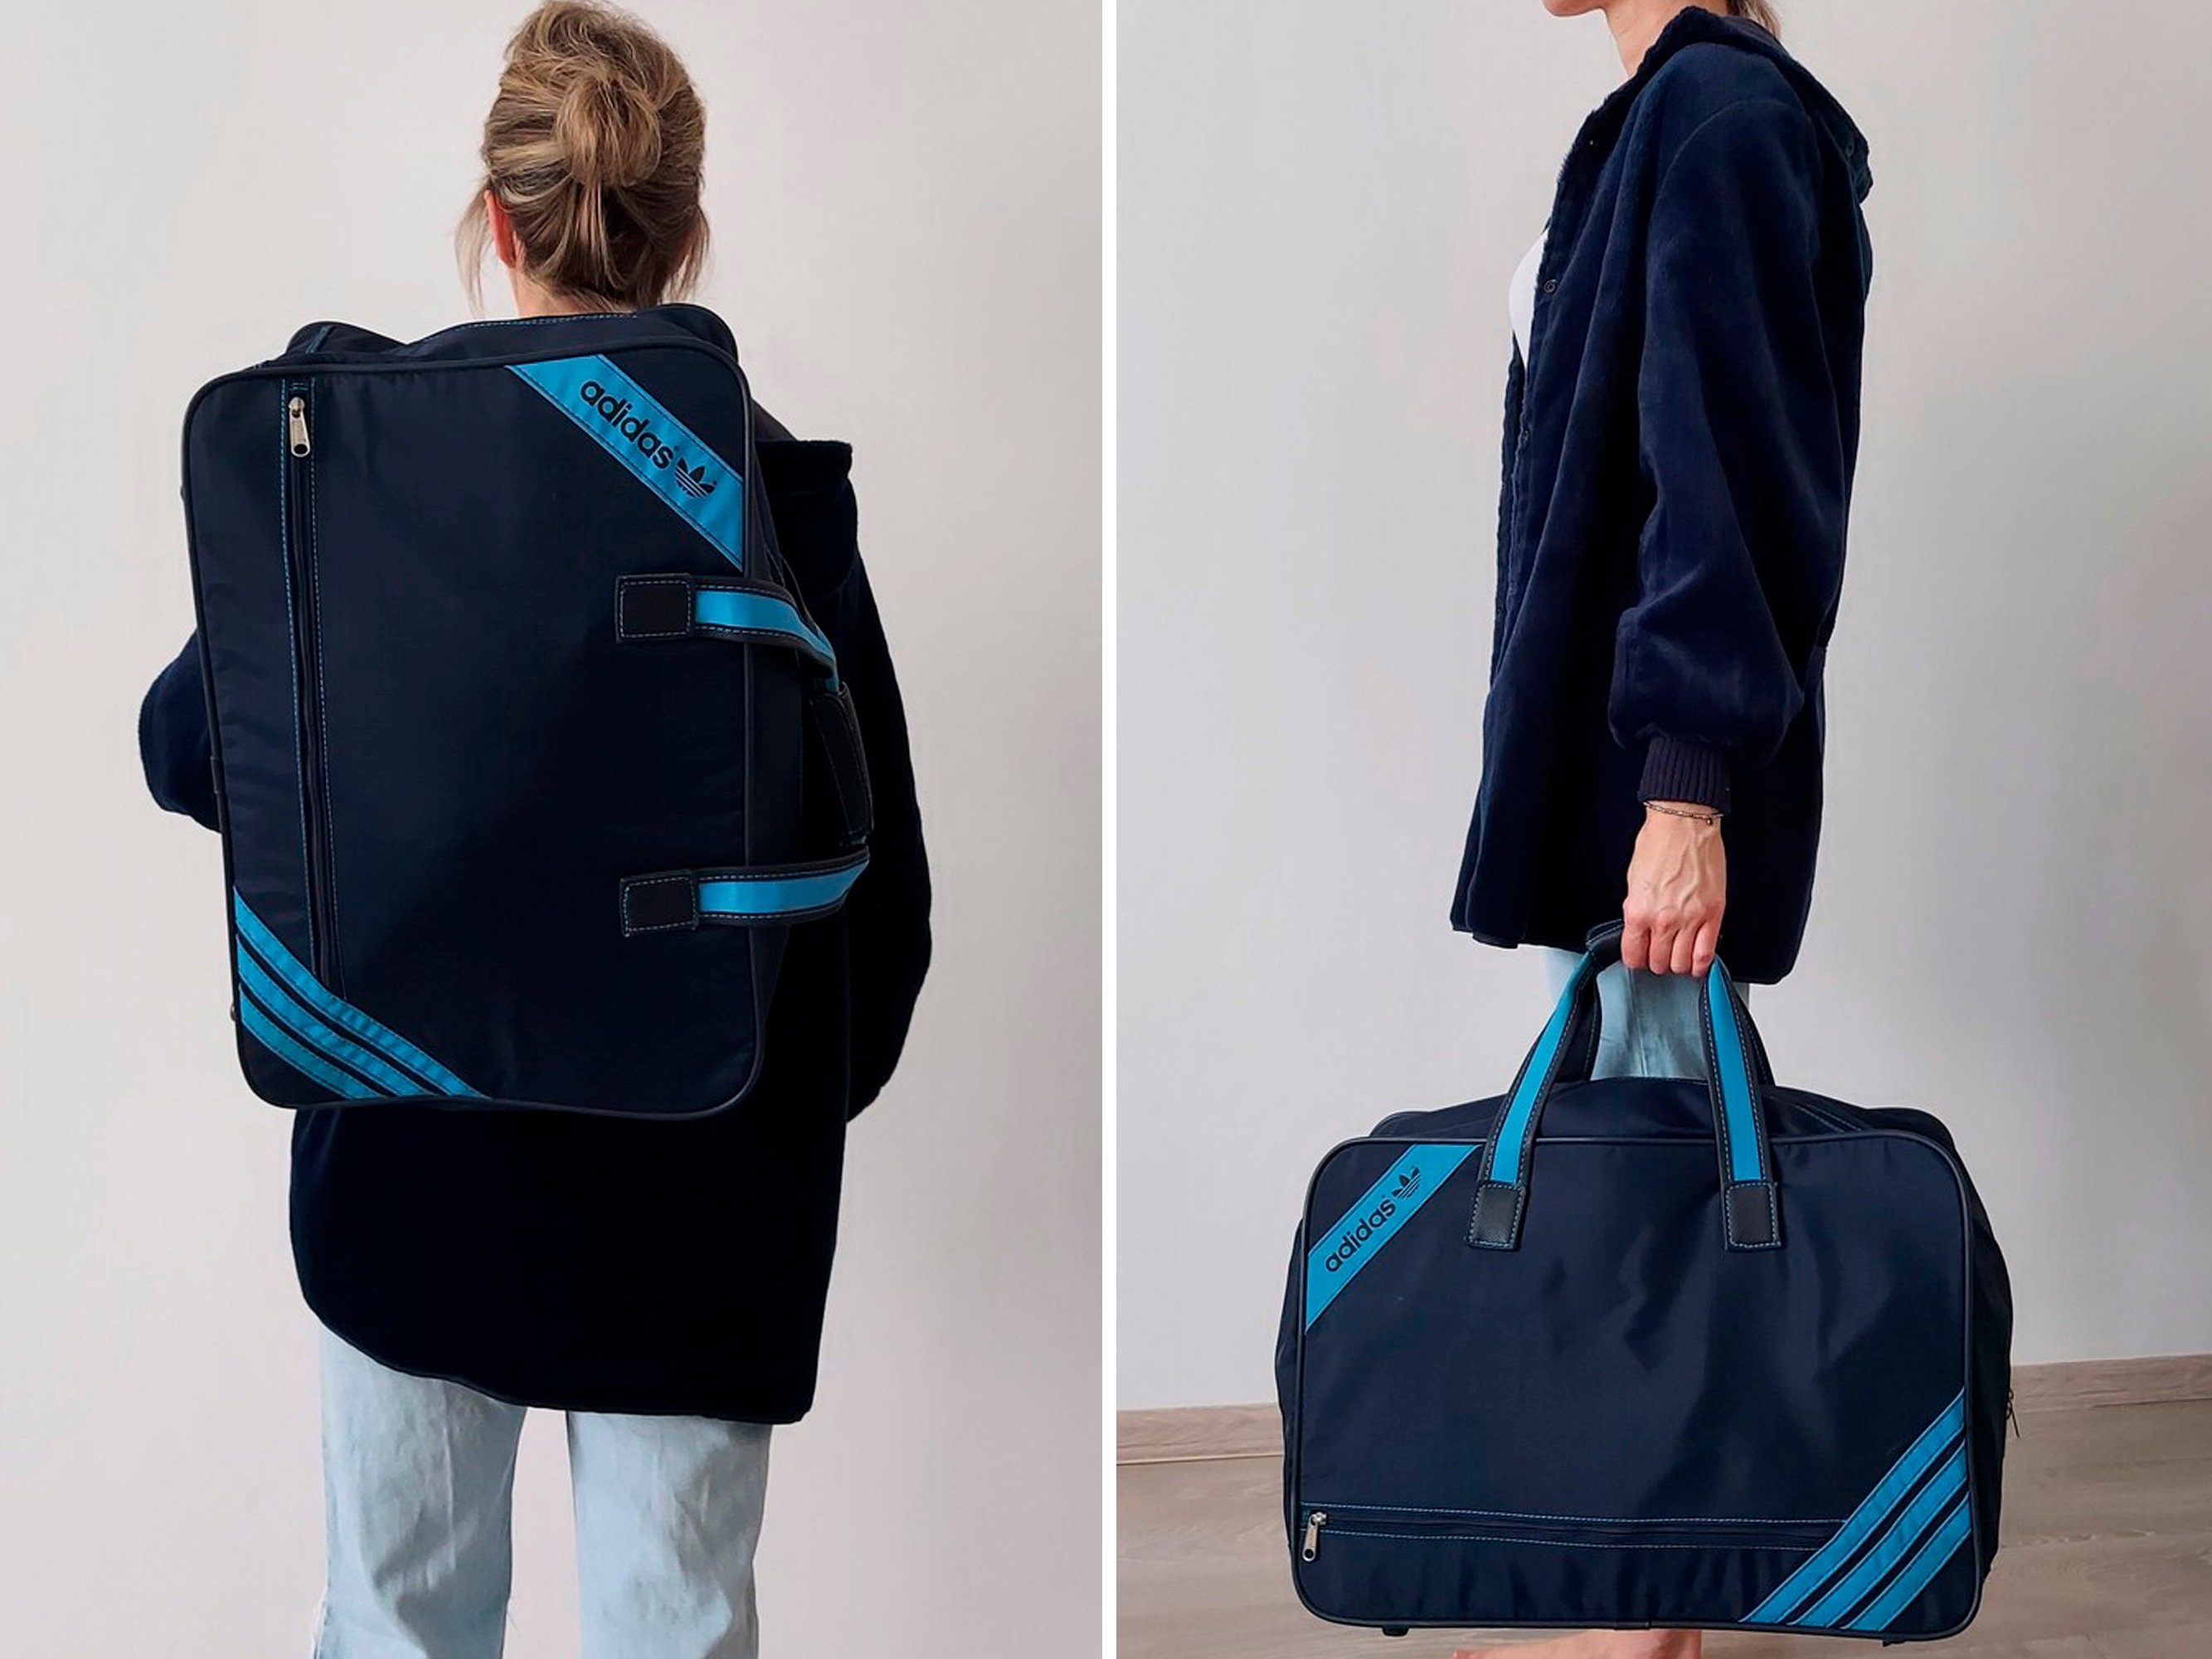 Polyester Black Adidas Travel Bag Supplier at Rs 1599 in Bengaluru | ID:  2851228514712